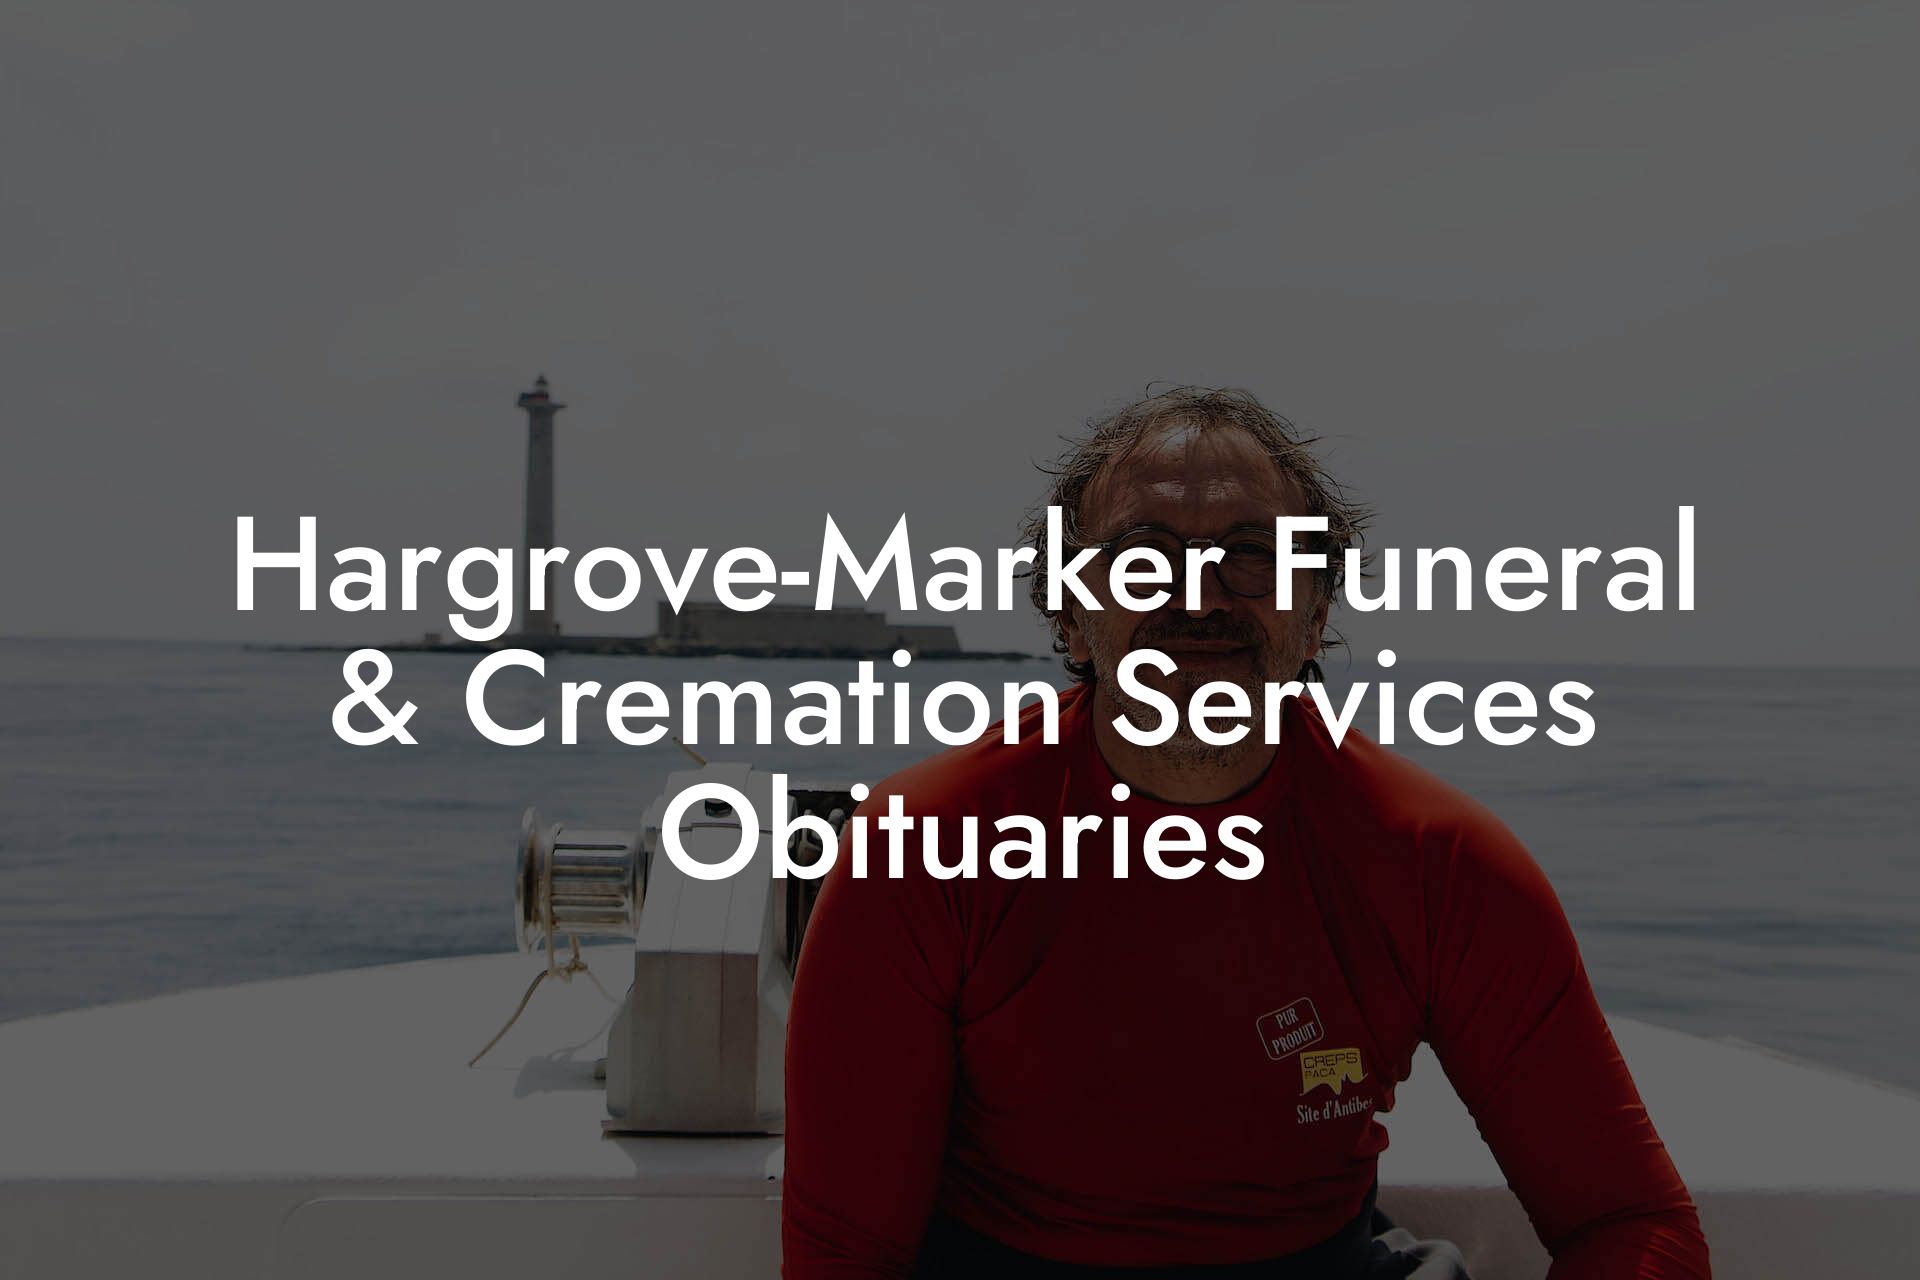 Hargrove-Marker Funeral & Cremation Services Obituaries